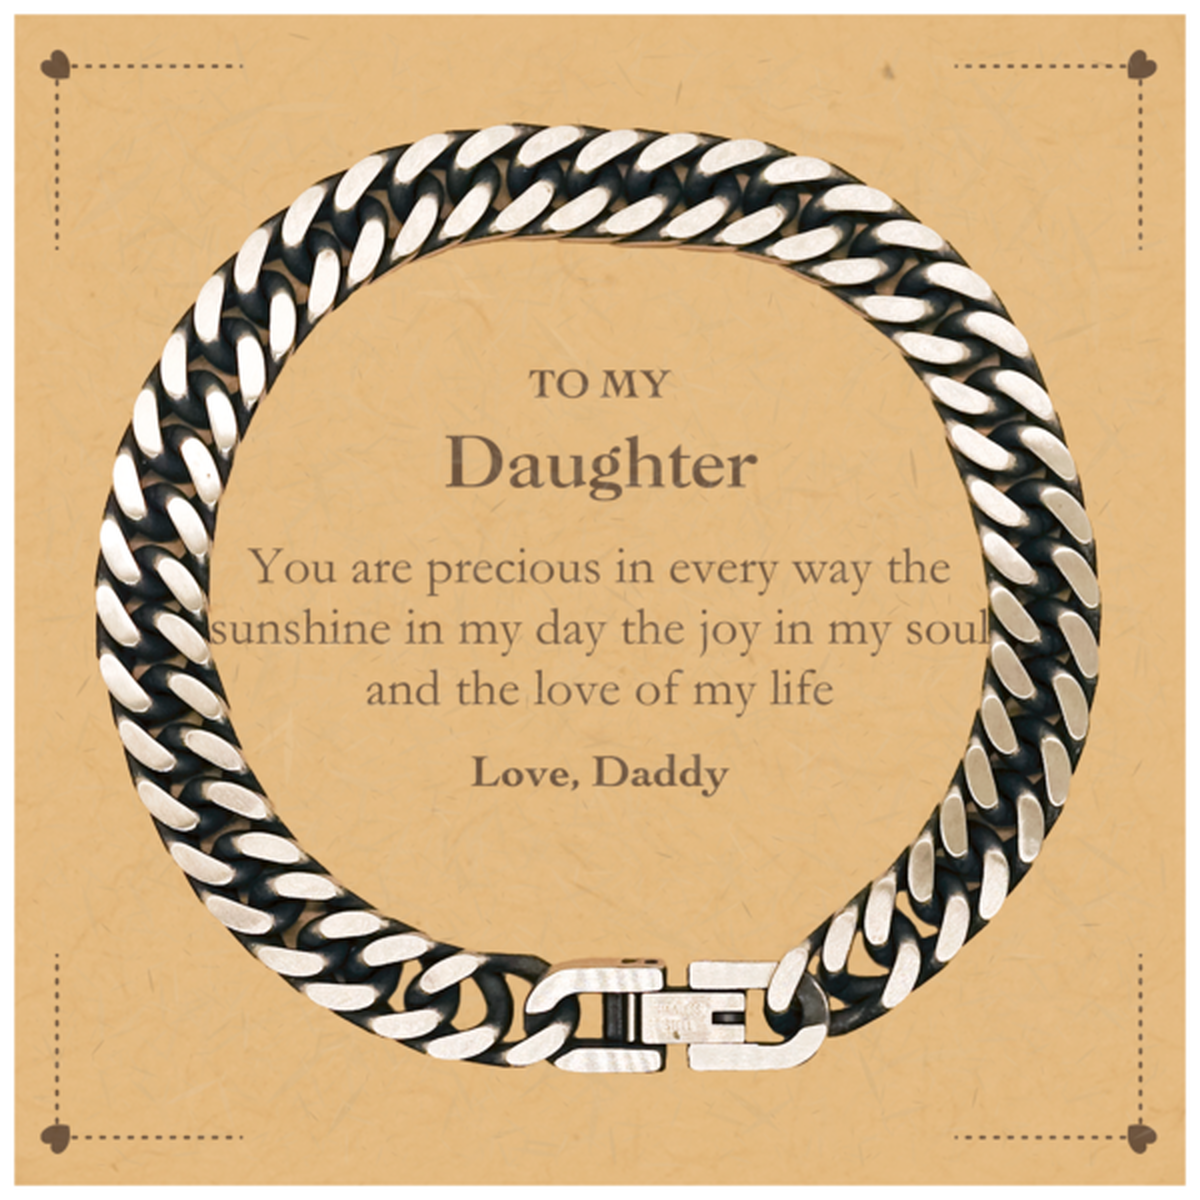 Graduation Gifts for Daughter Cuban Link Chain Bracelet Present from Daddy, Christmas Daughter Birthday Gifts Daughter You are precious in every way the sunshine in my day. Love, Daddy